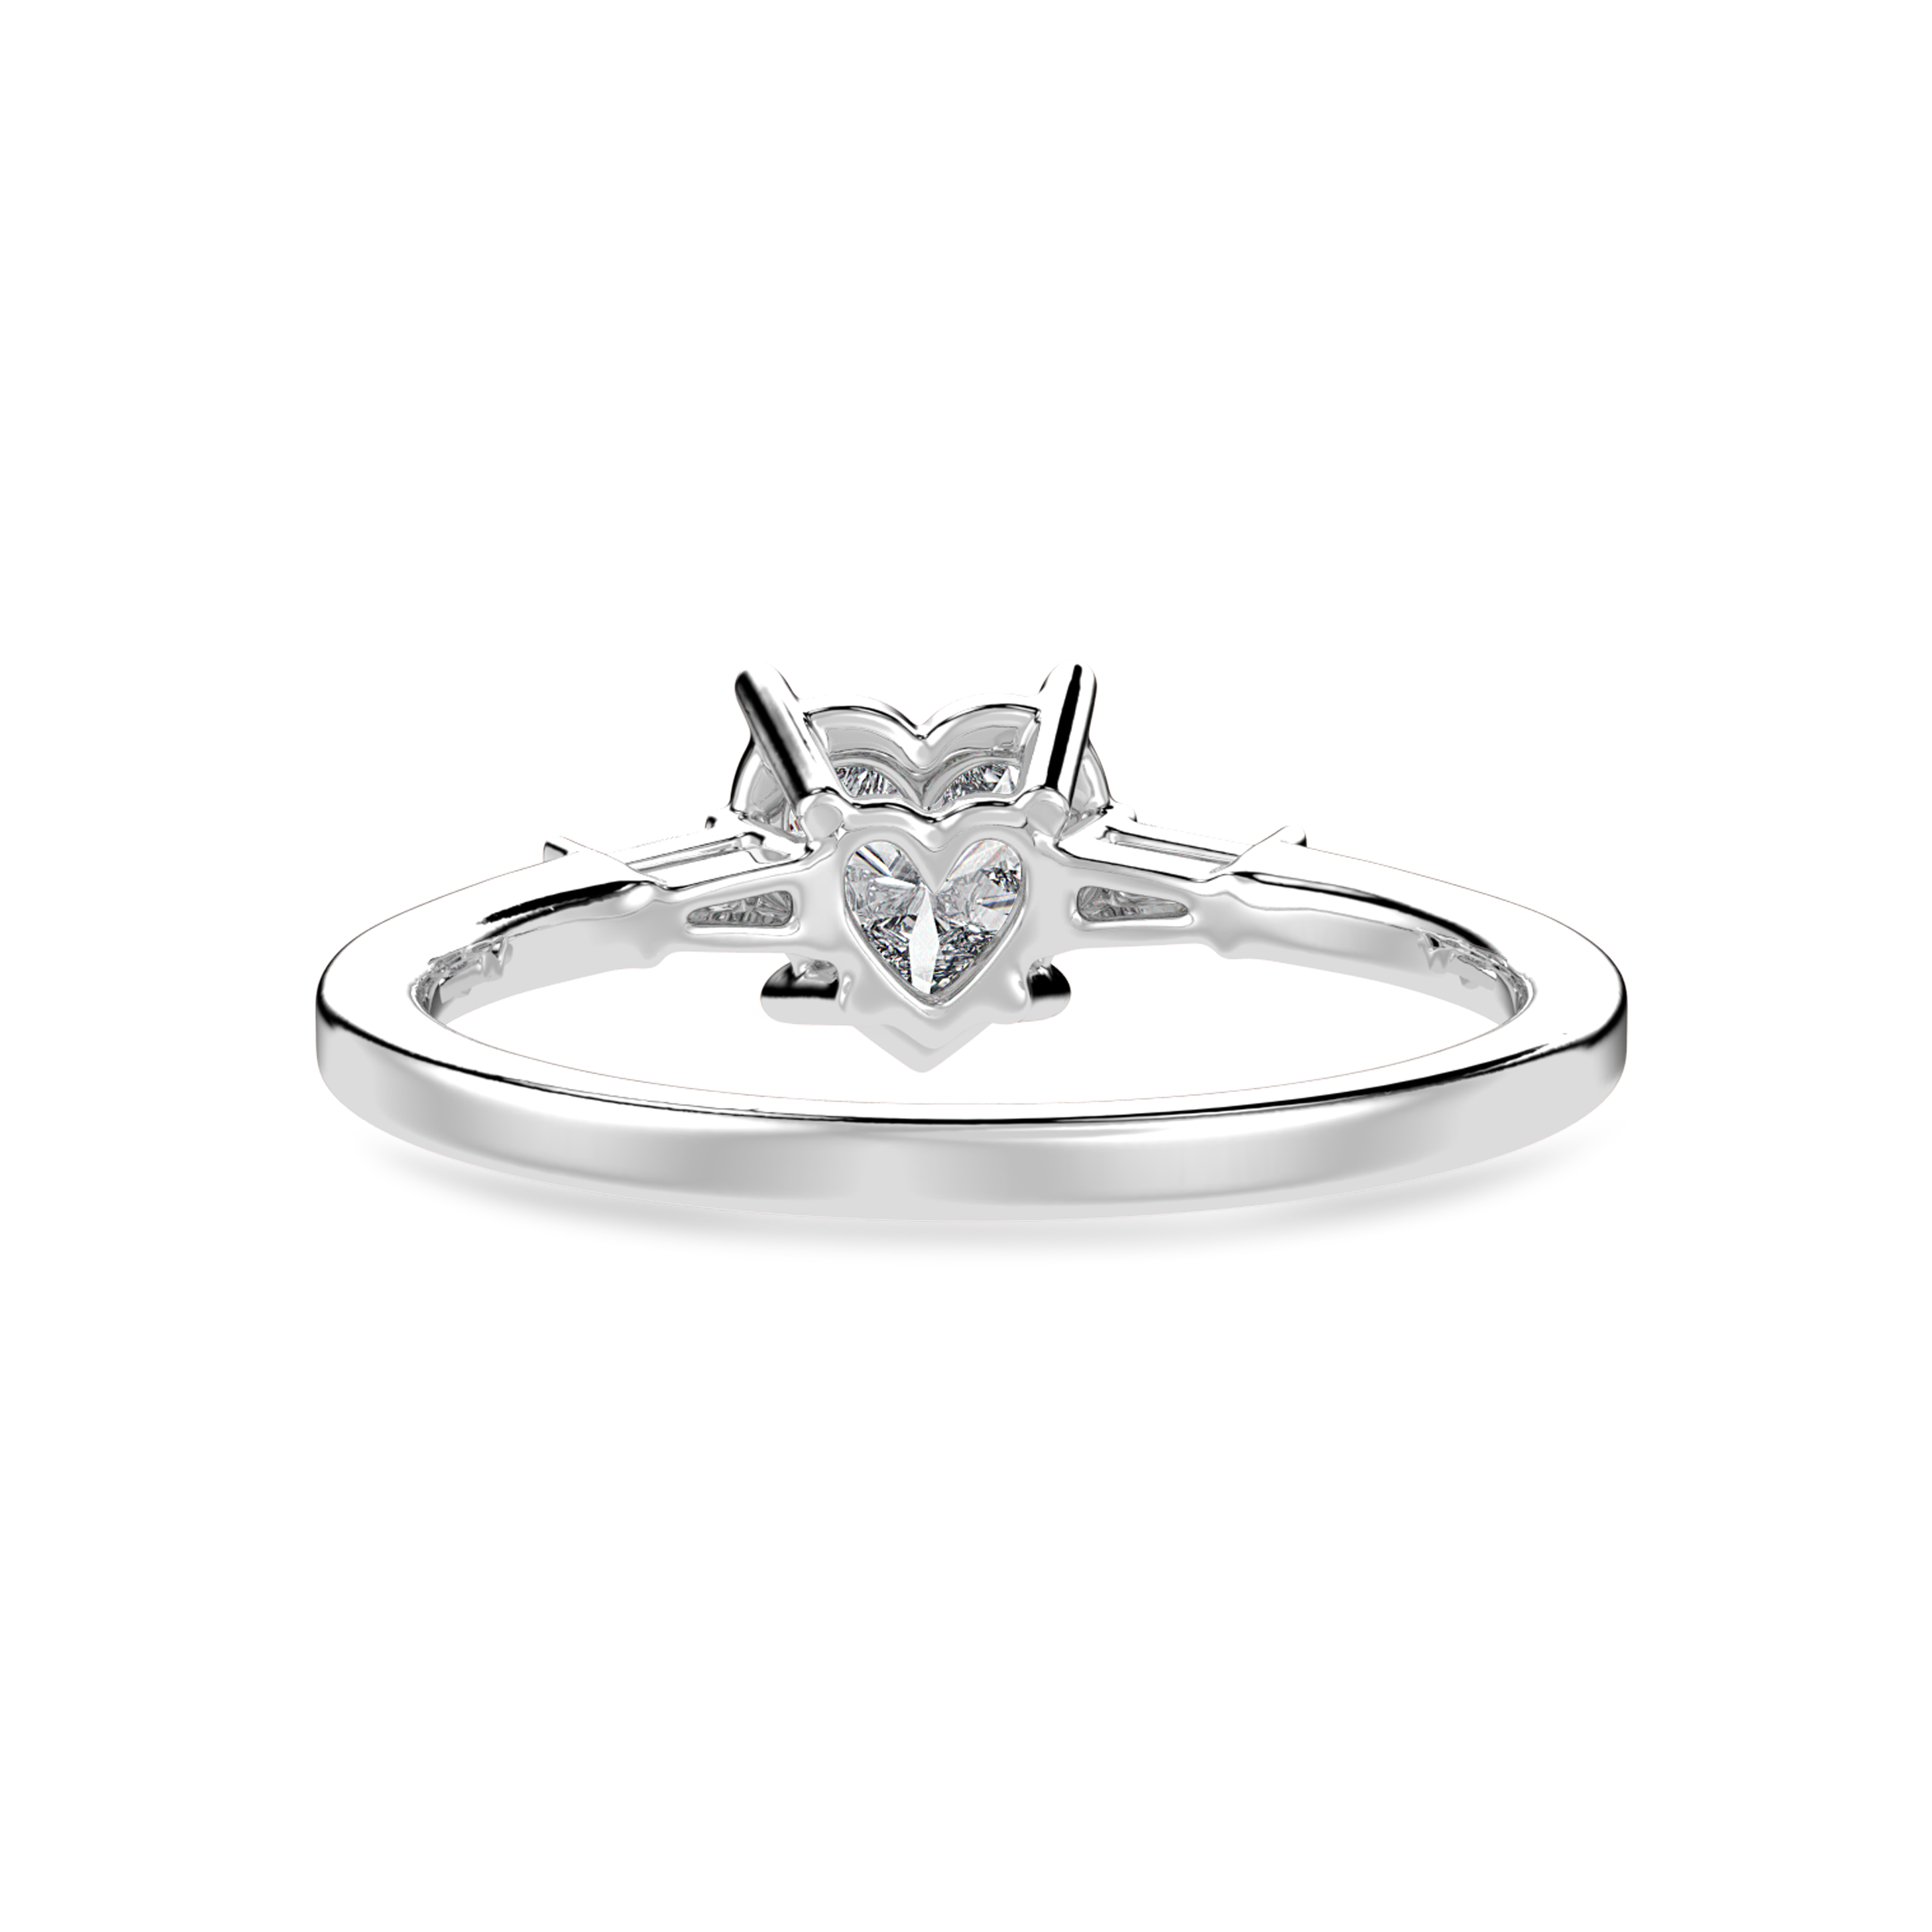 70-Pointer Heart Cut Solitaire with Baguette Diamond Accents Platinum Ring JL PT 1225-B   Jewelove.US